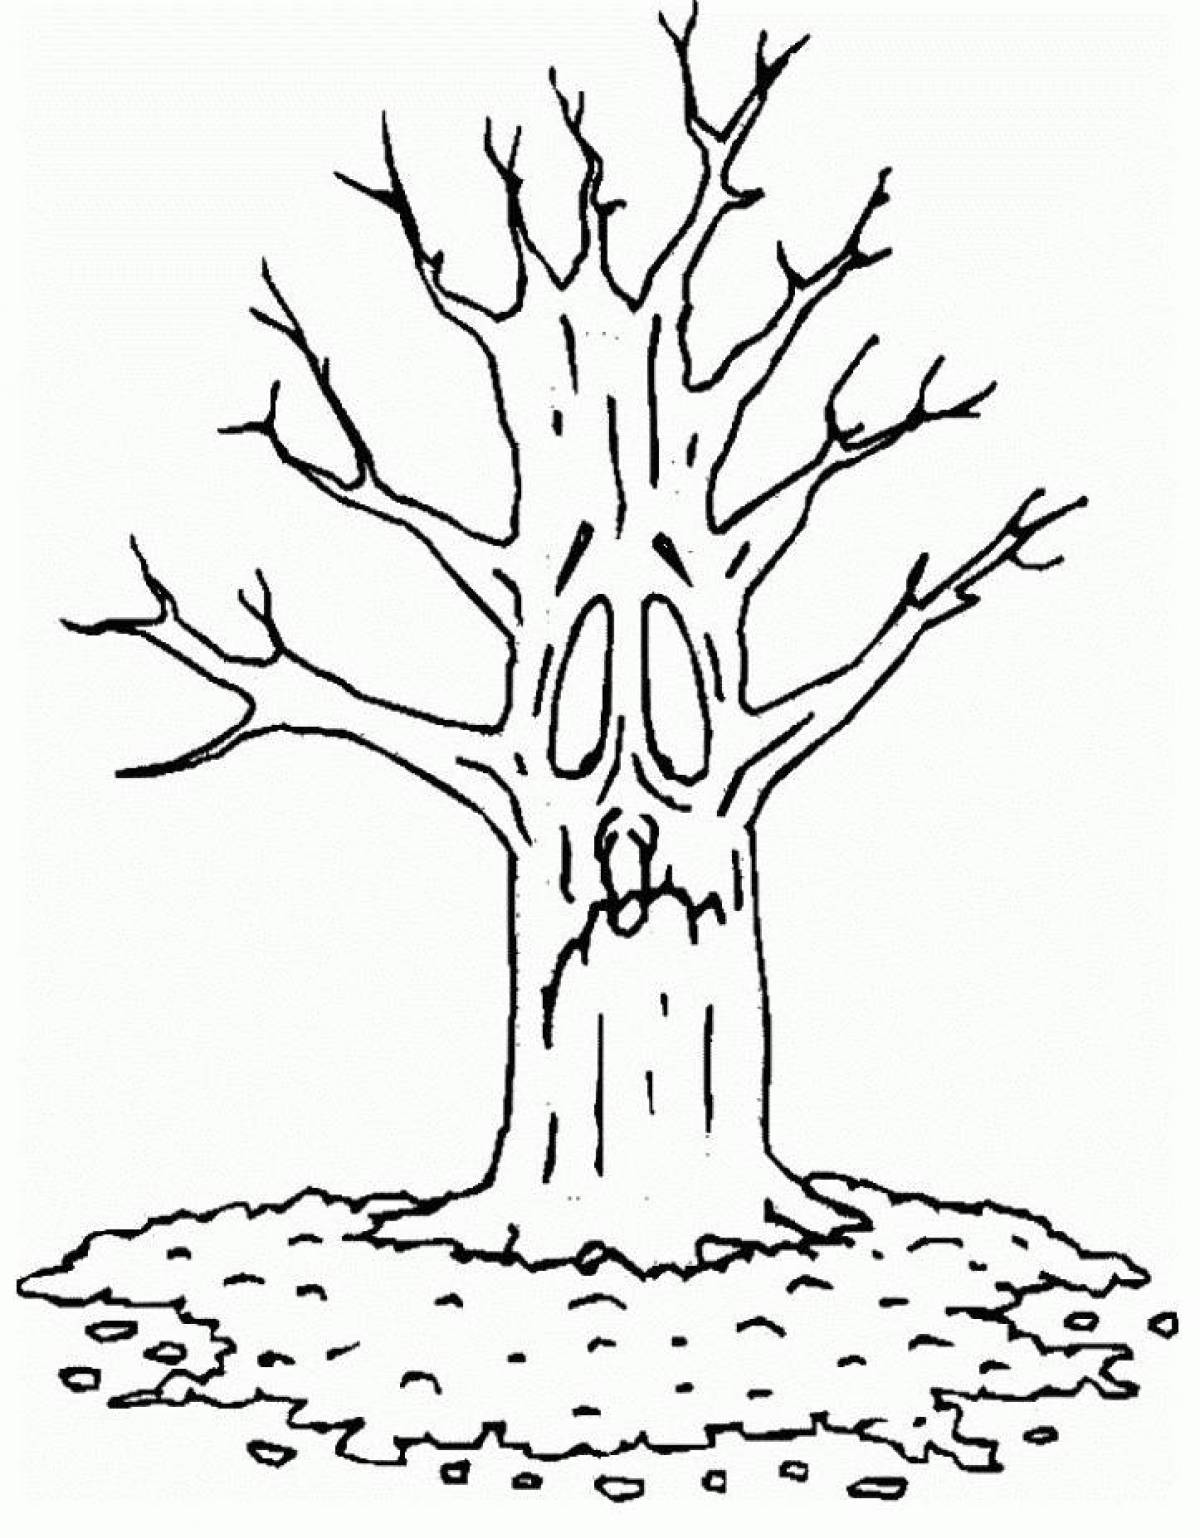 Exquisite tree without leaves coloring book for kids